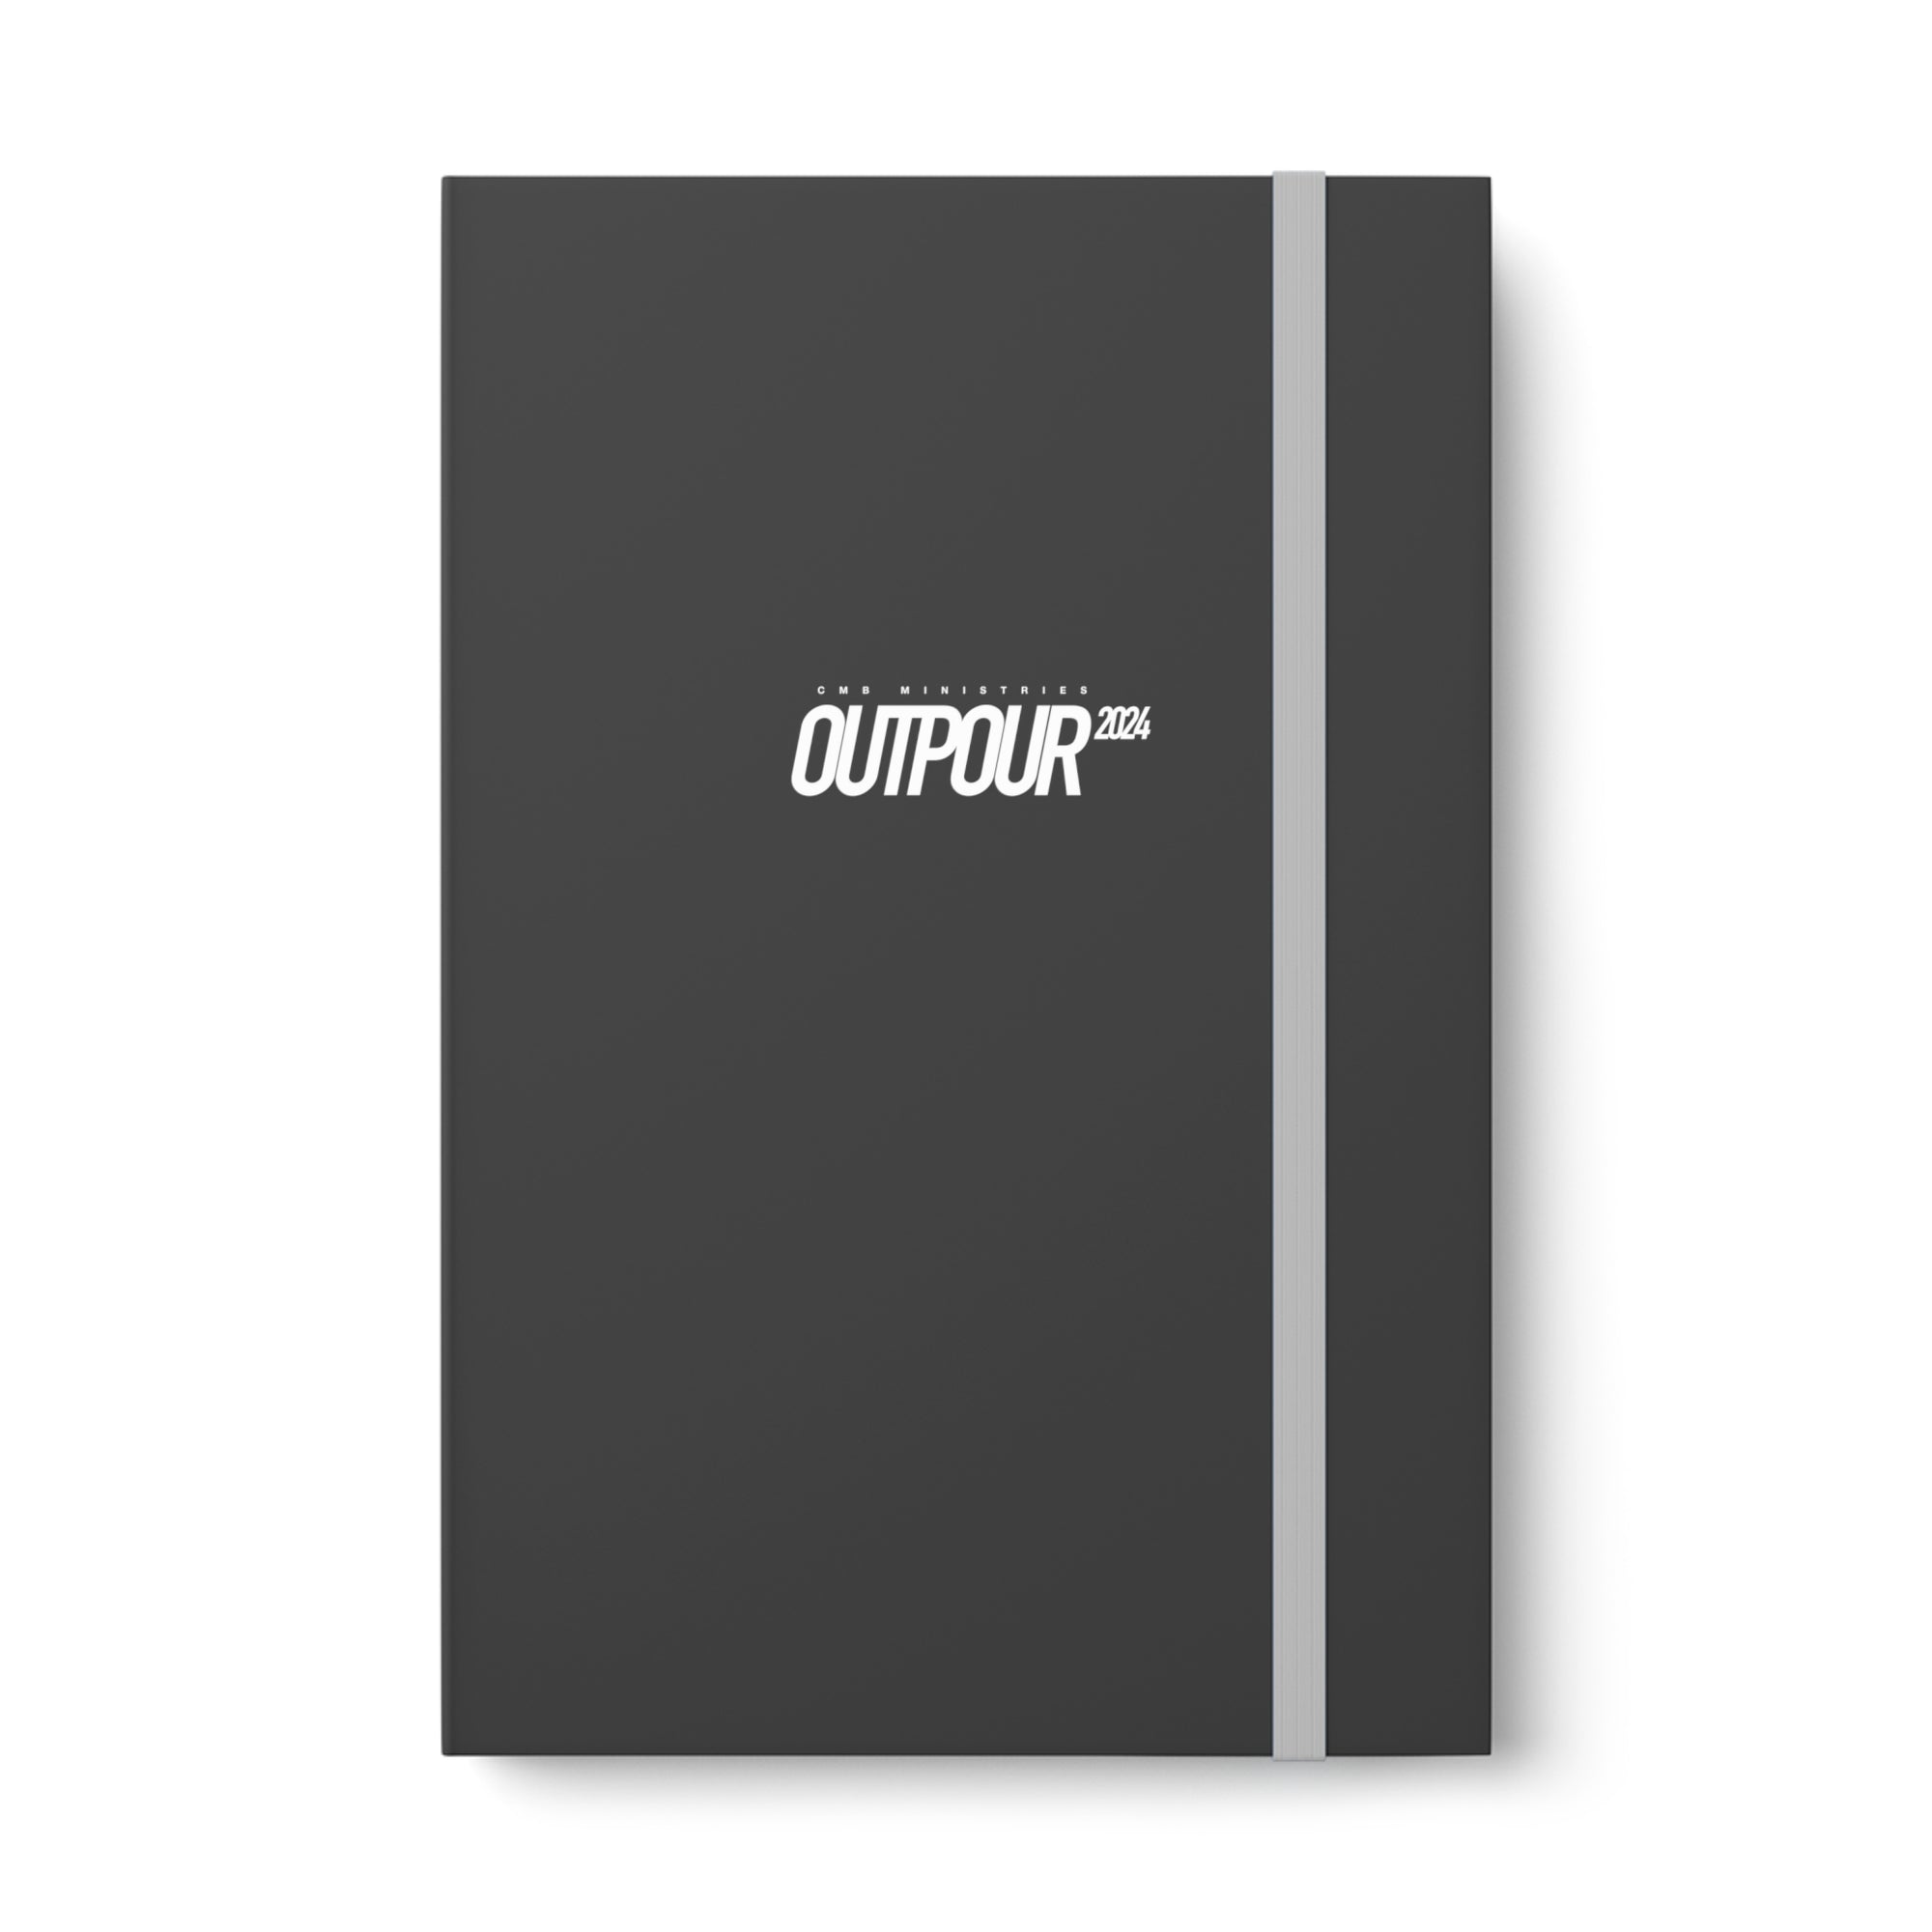 Outpour 2024 - Color Contrast Notebook - Ruled